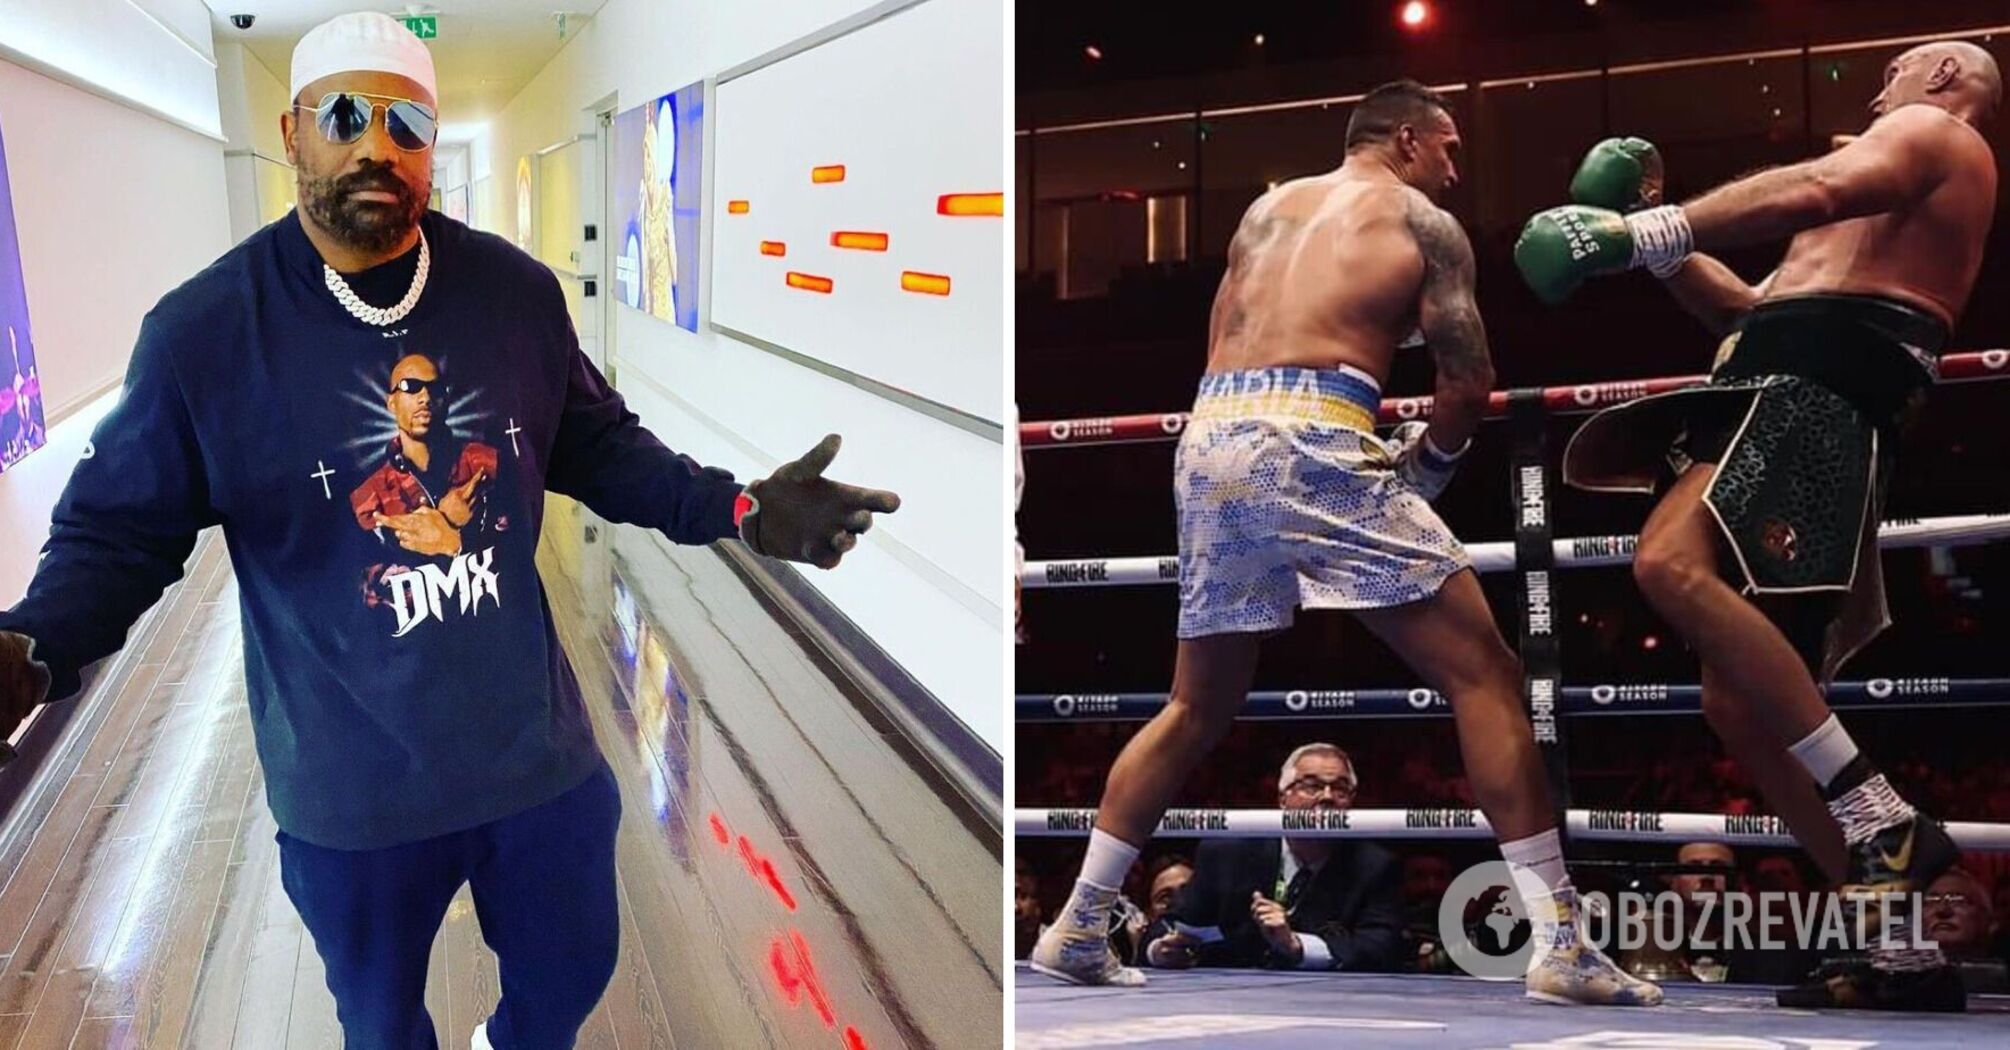 'A disgrace': Chisora reacts angrily to referee's work during the Usyk-Fury fight